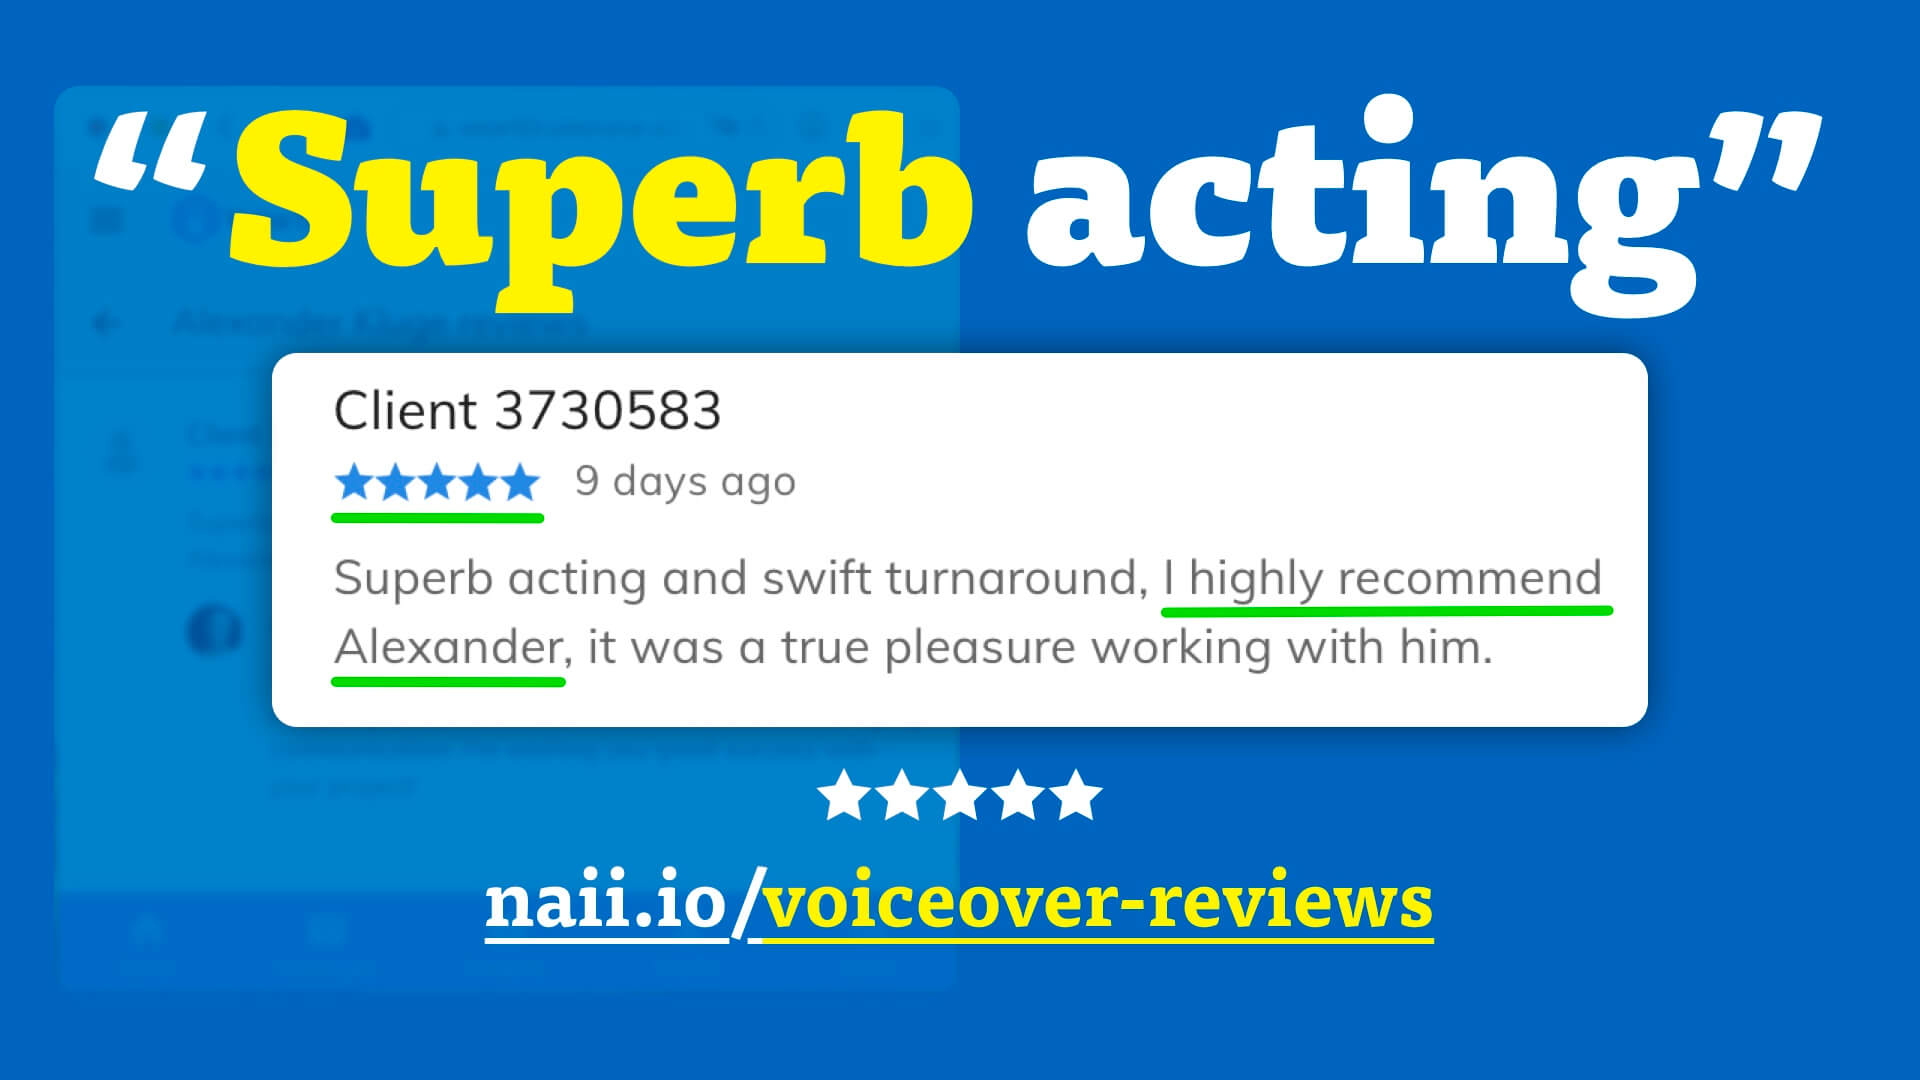 5 star-rating ⭐️⭐️⭐️⭐️⭐️ from voiceover client Elena K. on Voice123. She said, “Superb acting and swift turnaround, I highly recommend Alexander, it was true pleasure working with him.